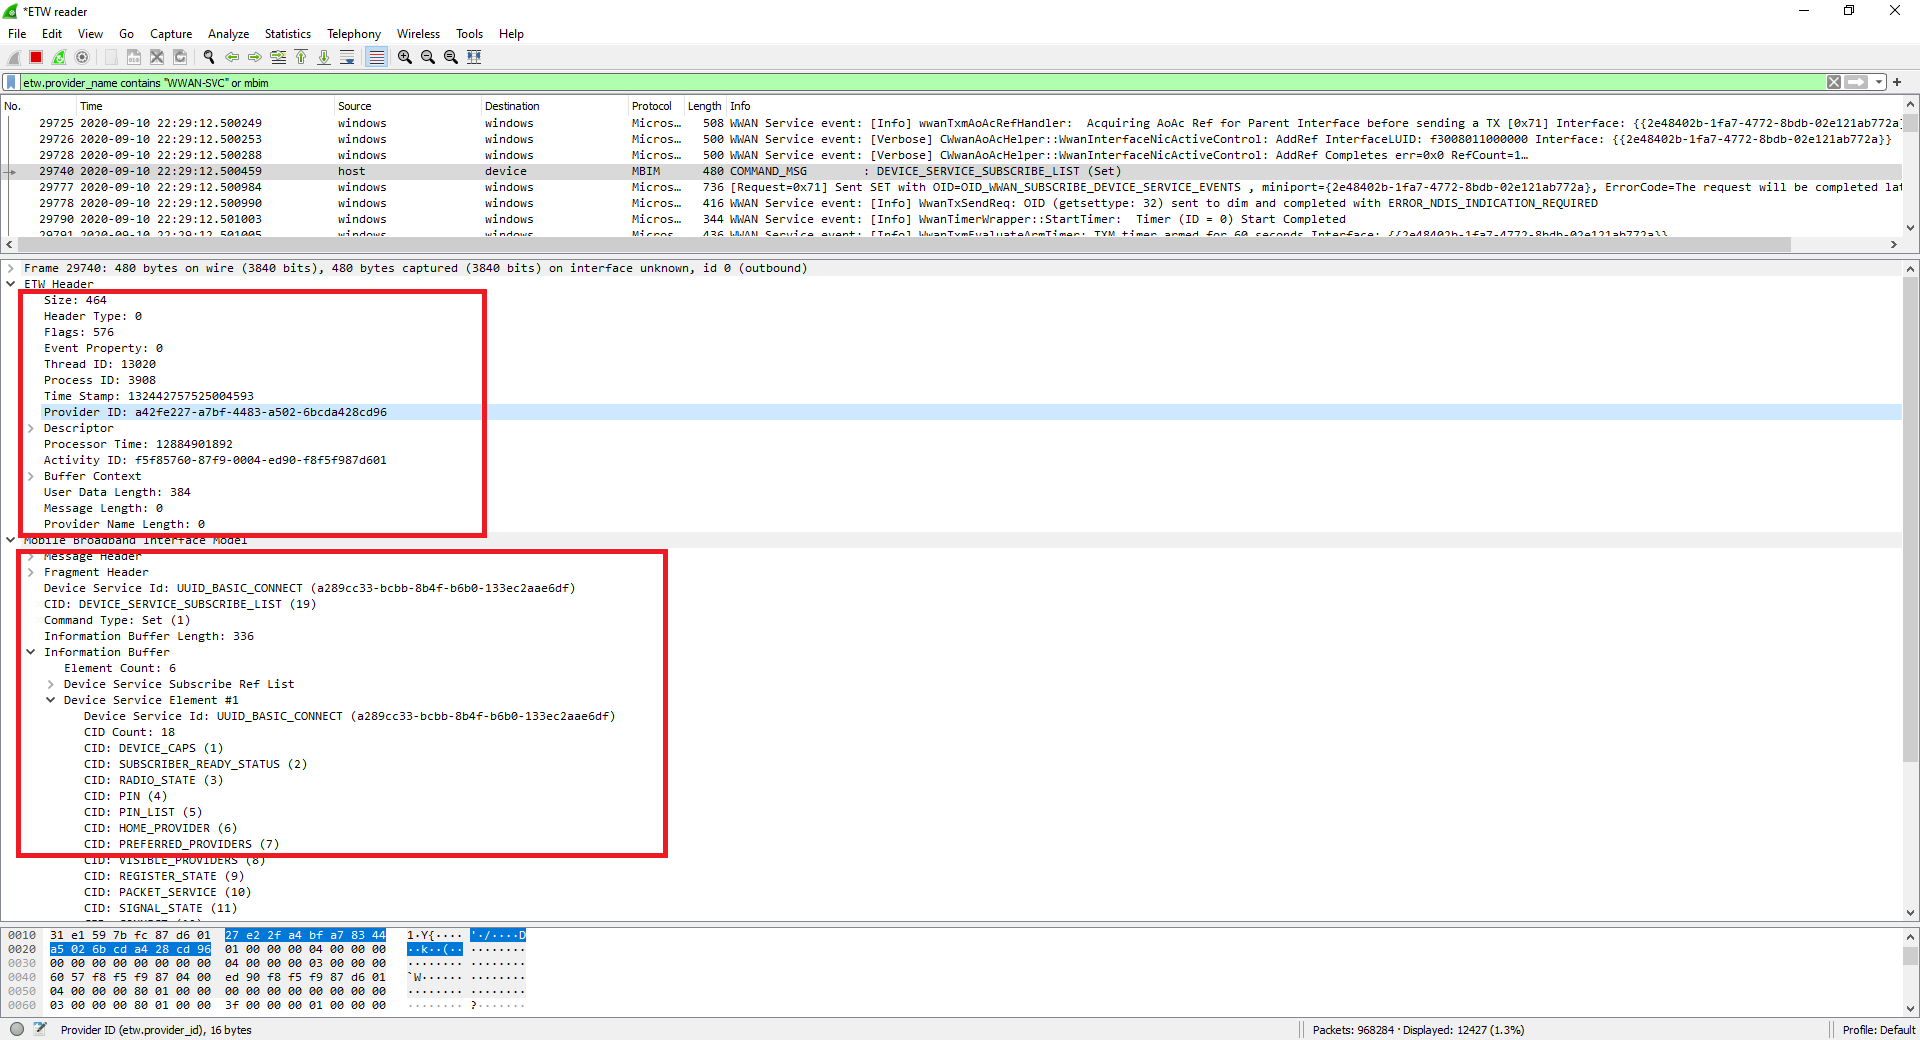 Screenshot of Wireshark displaying details of a selected message.